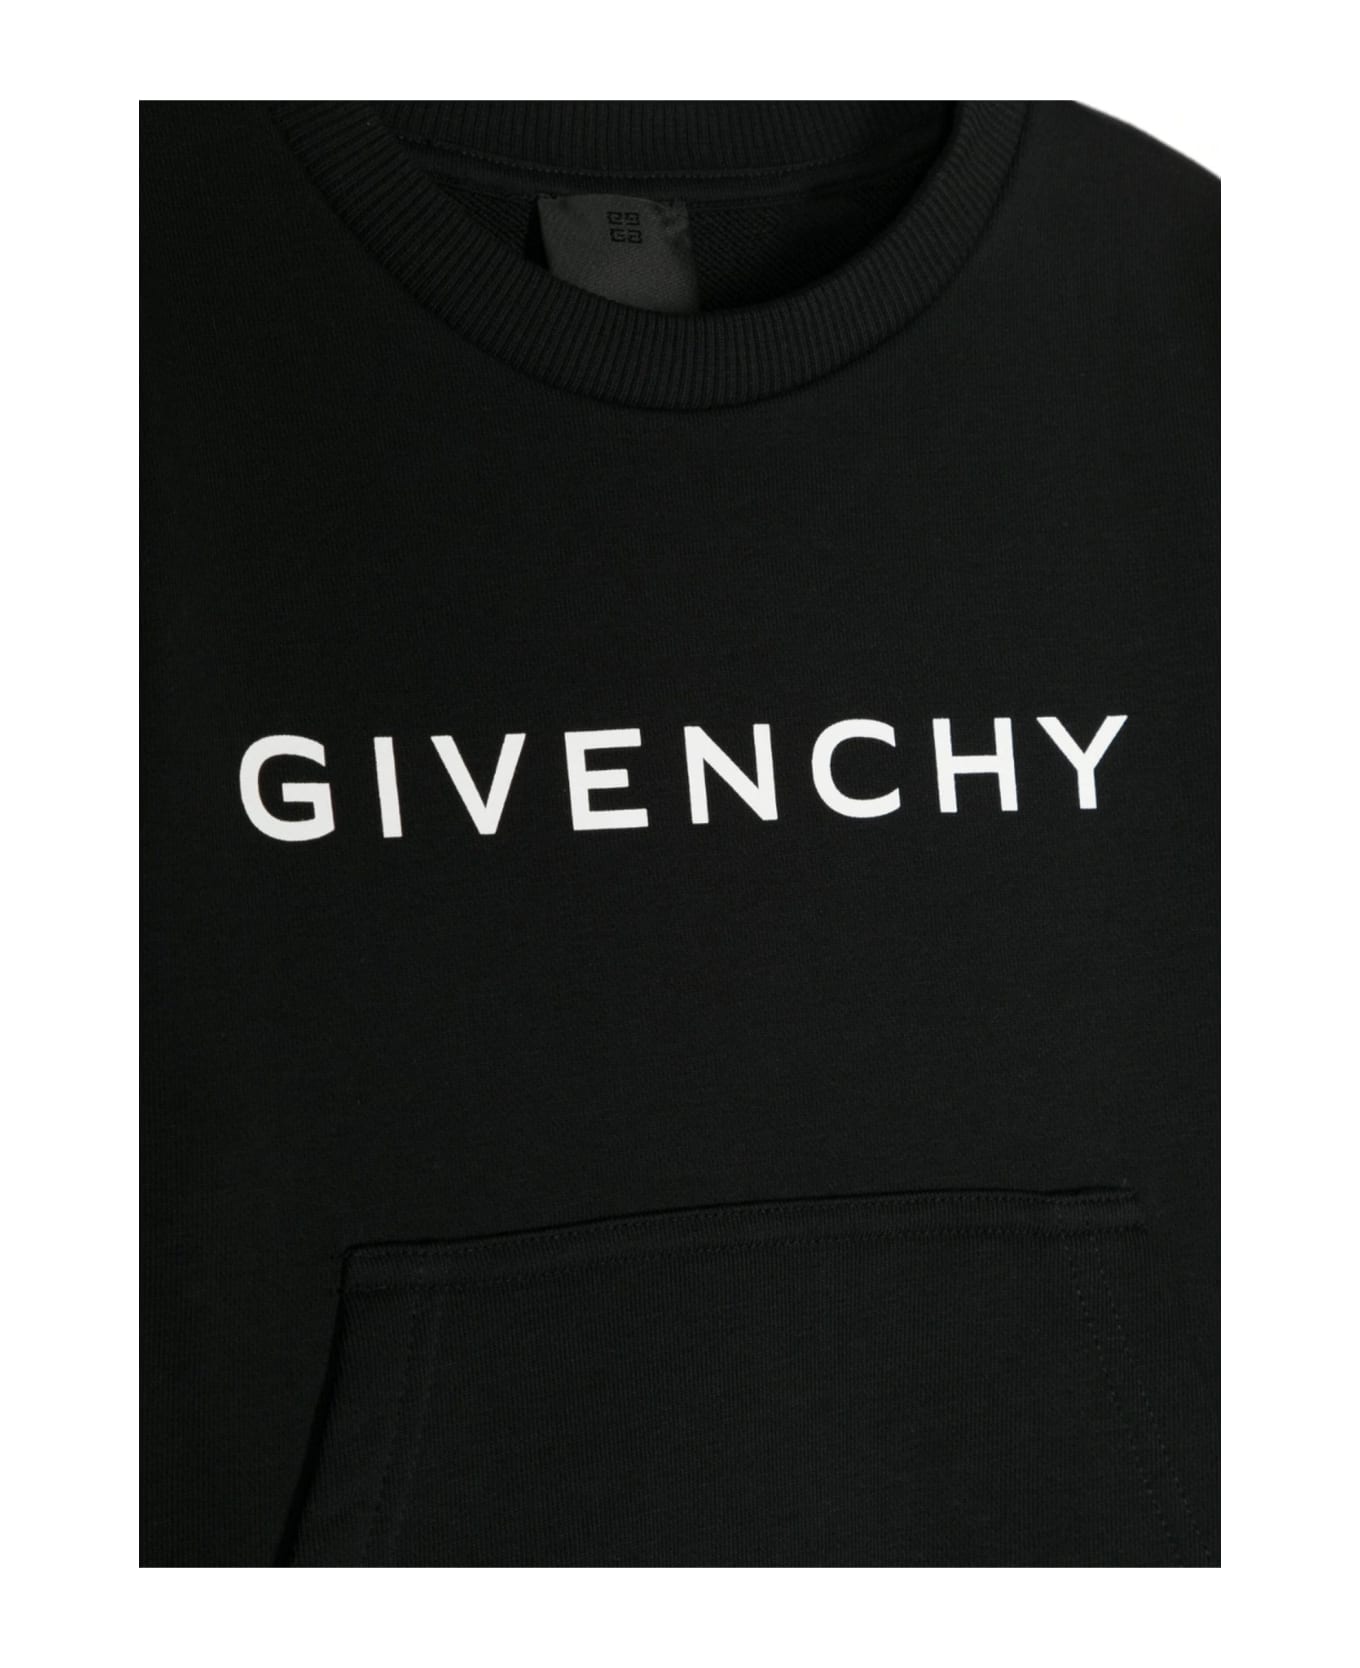 Givenchy Kids Sweaters Black - Black